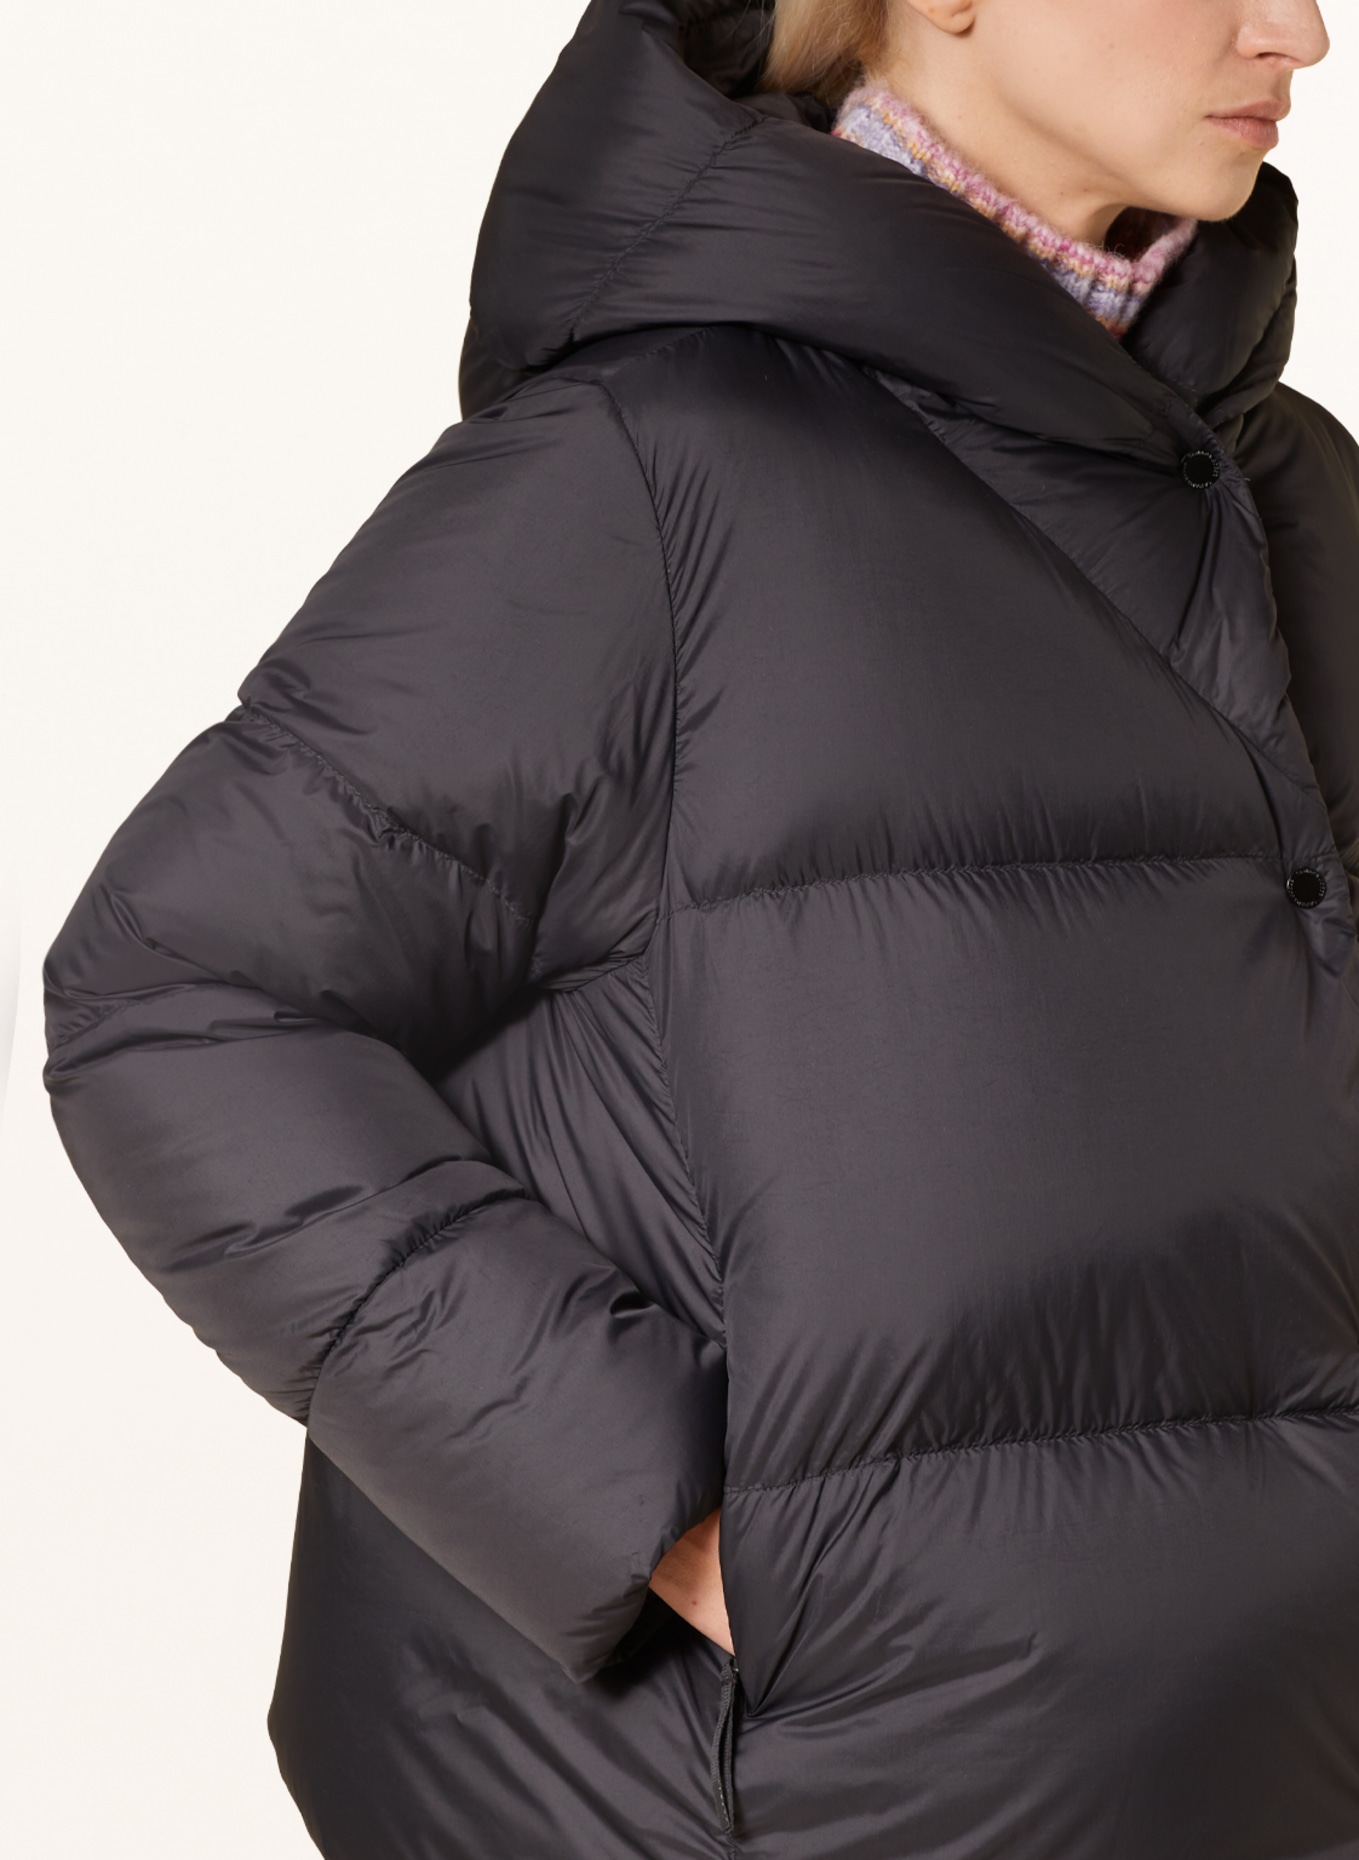 Bundle Up in These Canada Goose Winter Coats — 20% Off | Us Weekly